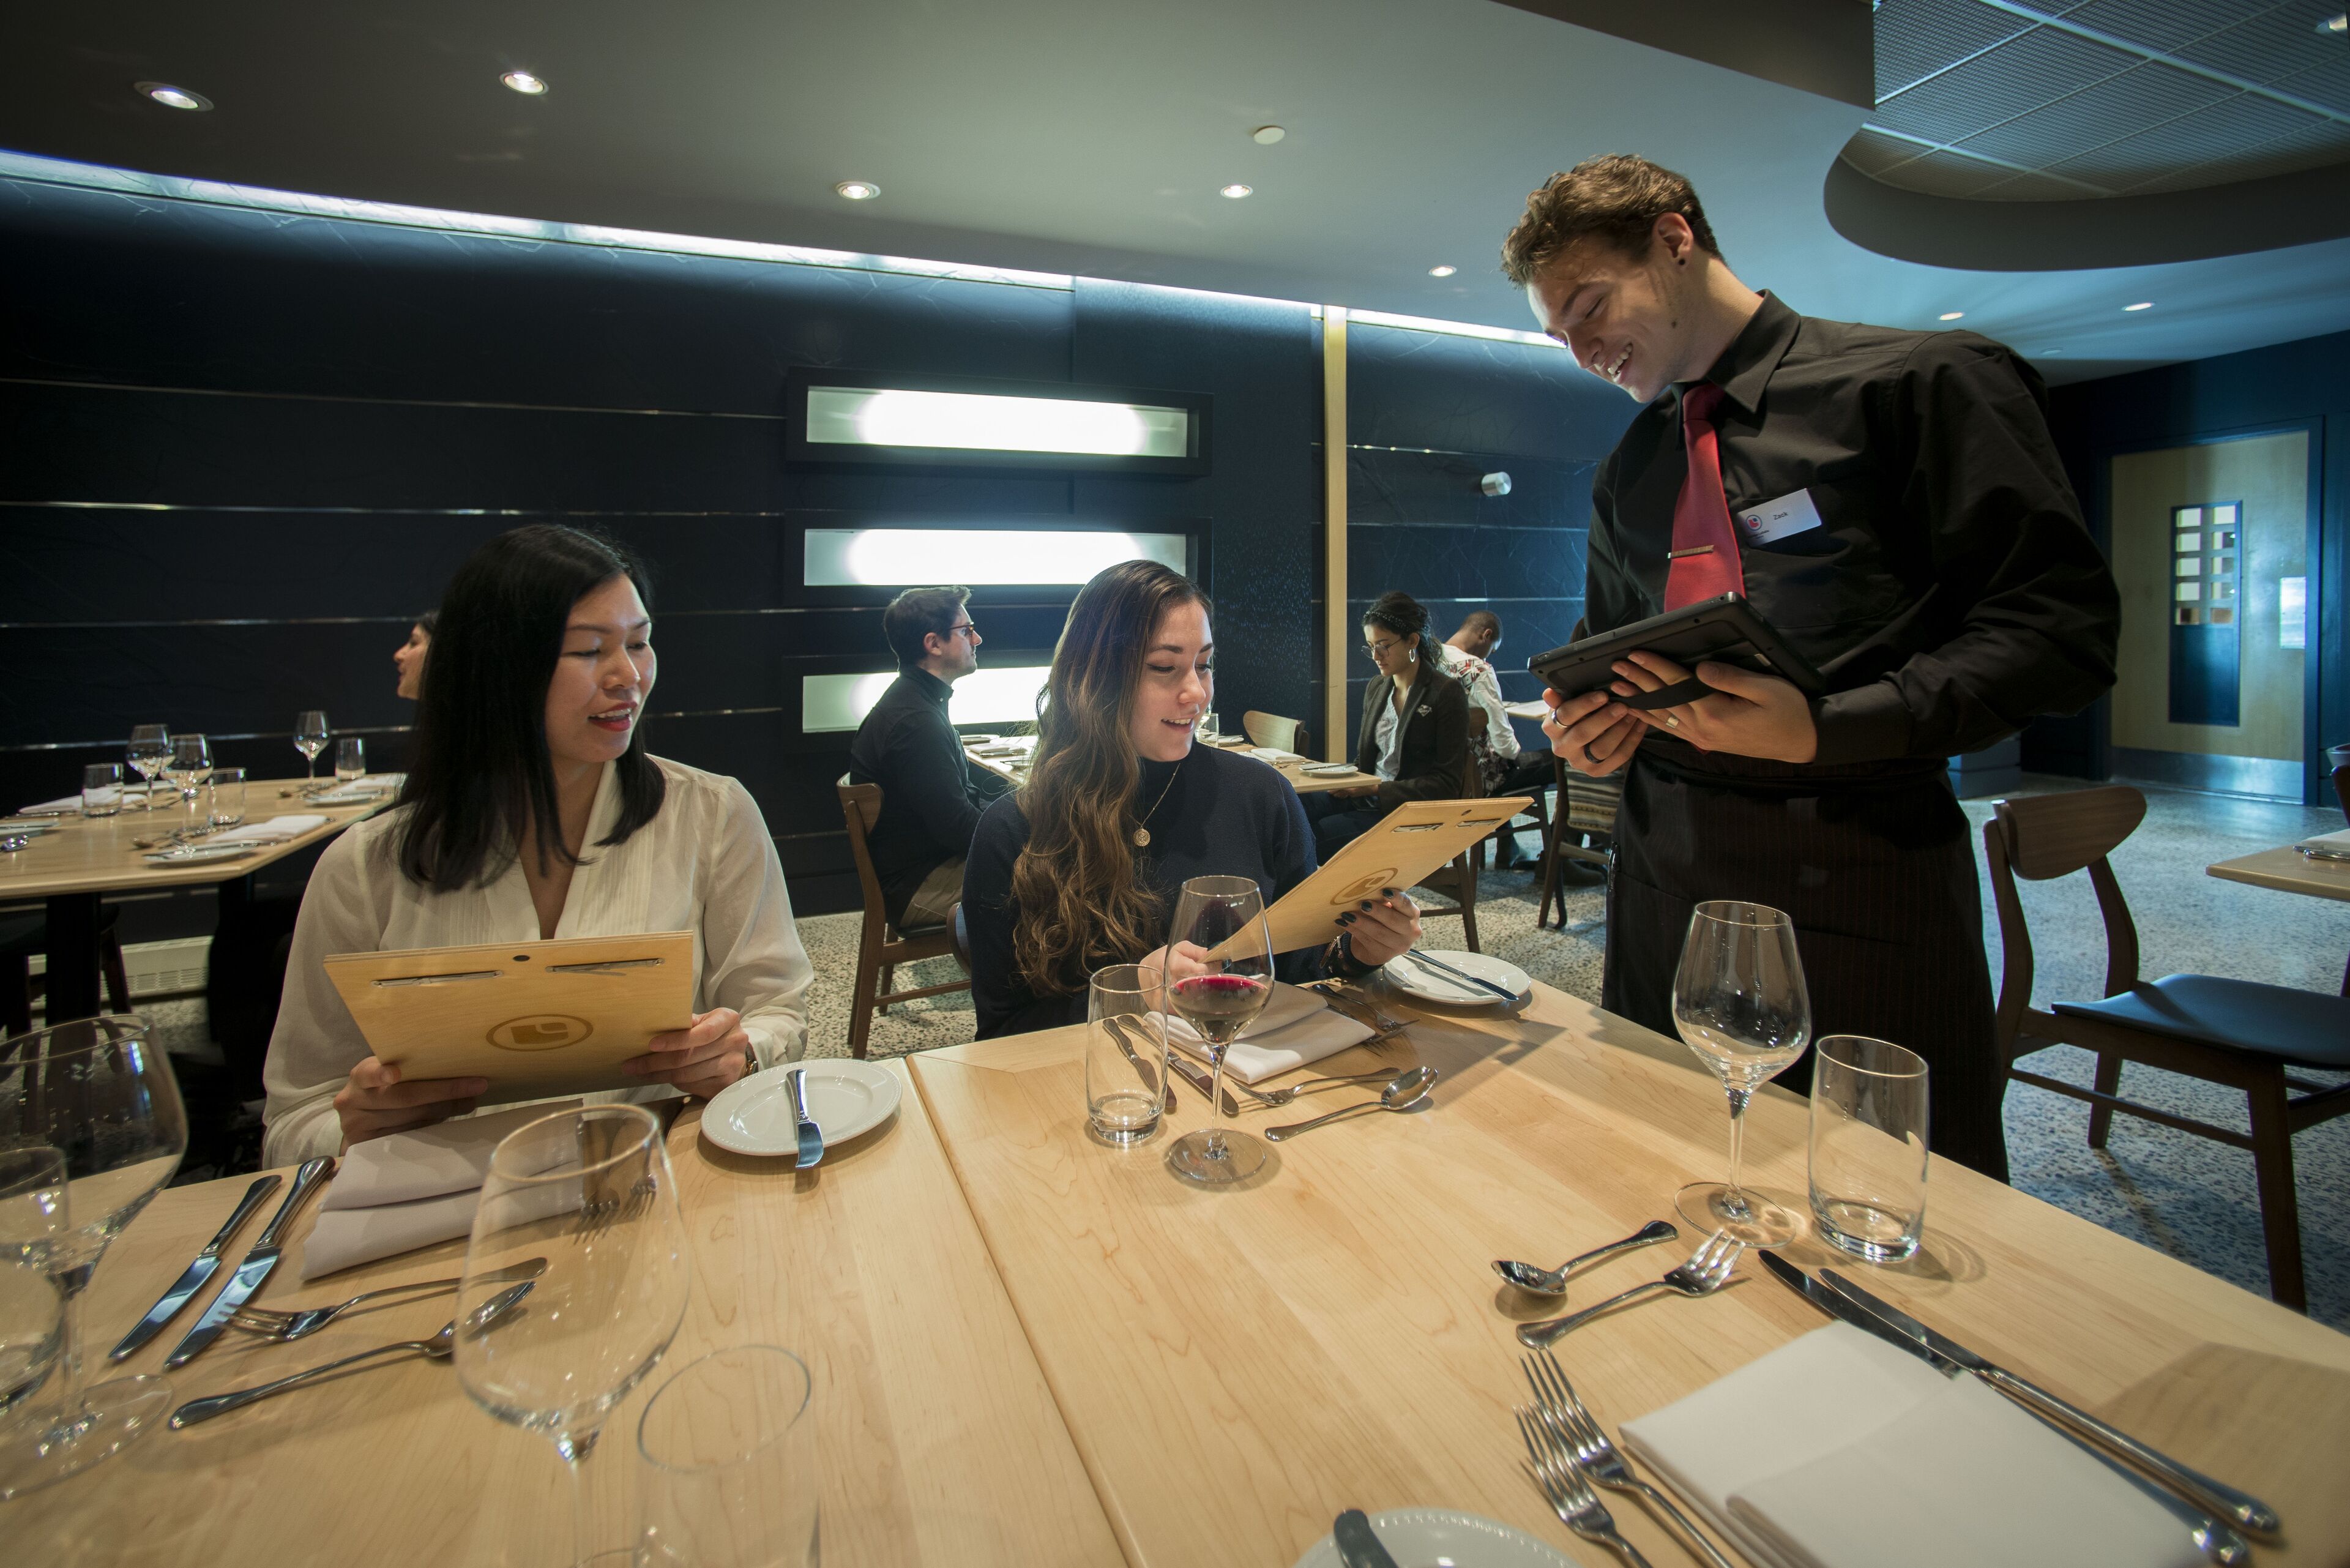 Guests exploring the menu with the assistance of a cheerful waiter at an elegant restaurant.